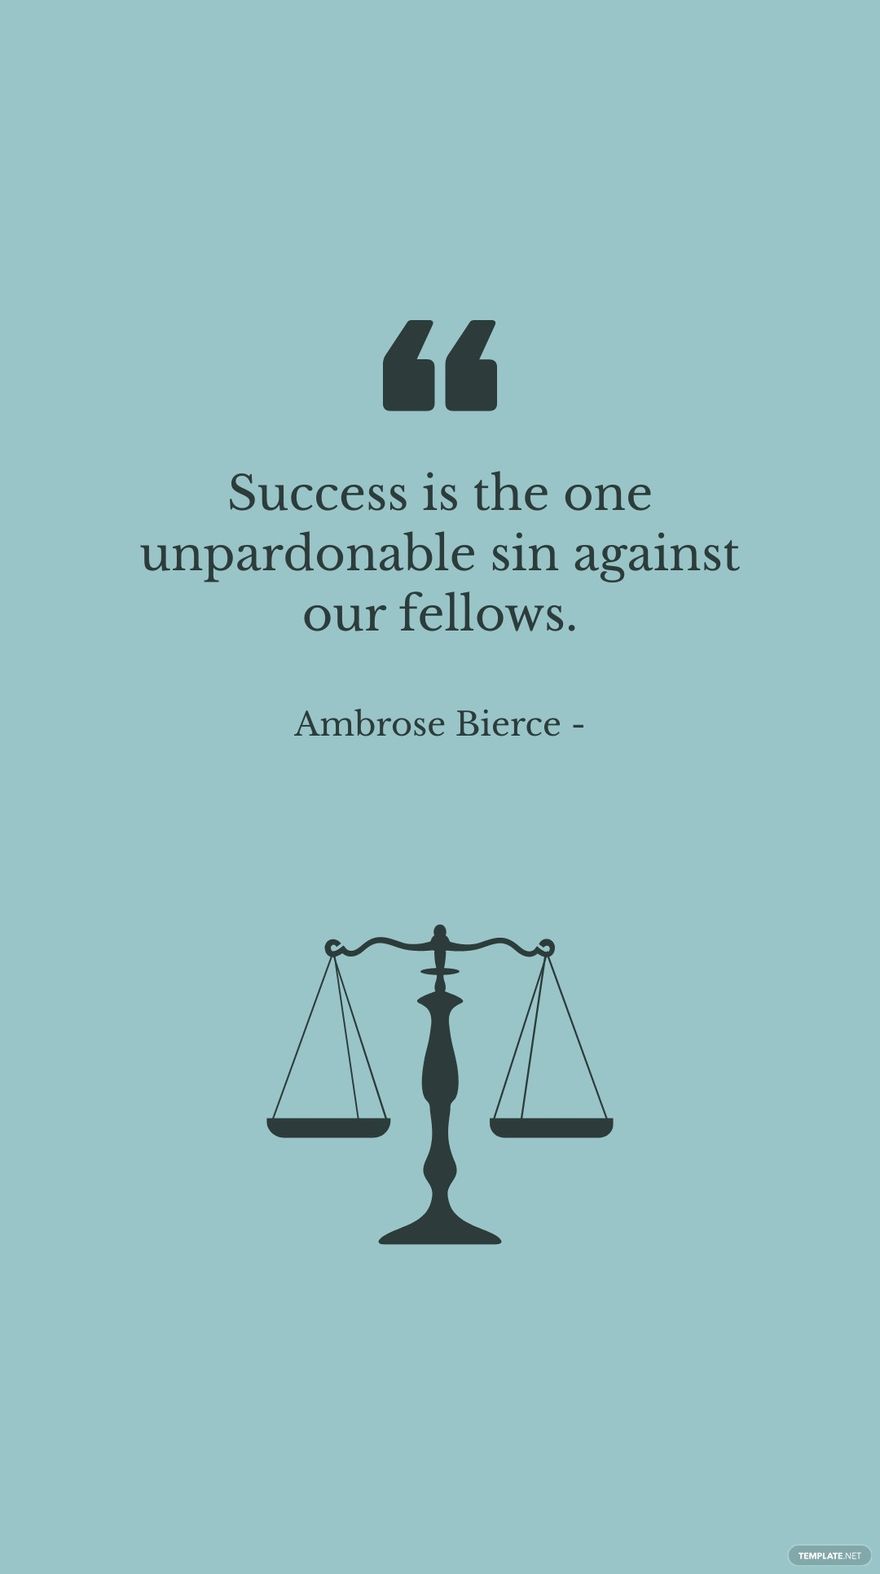 Free Ambrose Bierce - Success is the one unpardonable sin against our fellows. in JPG